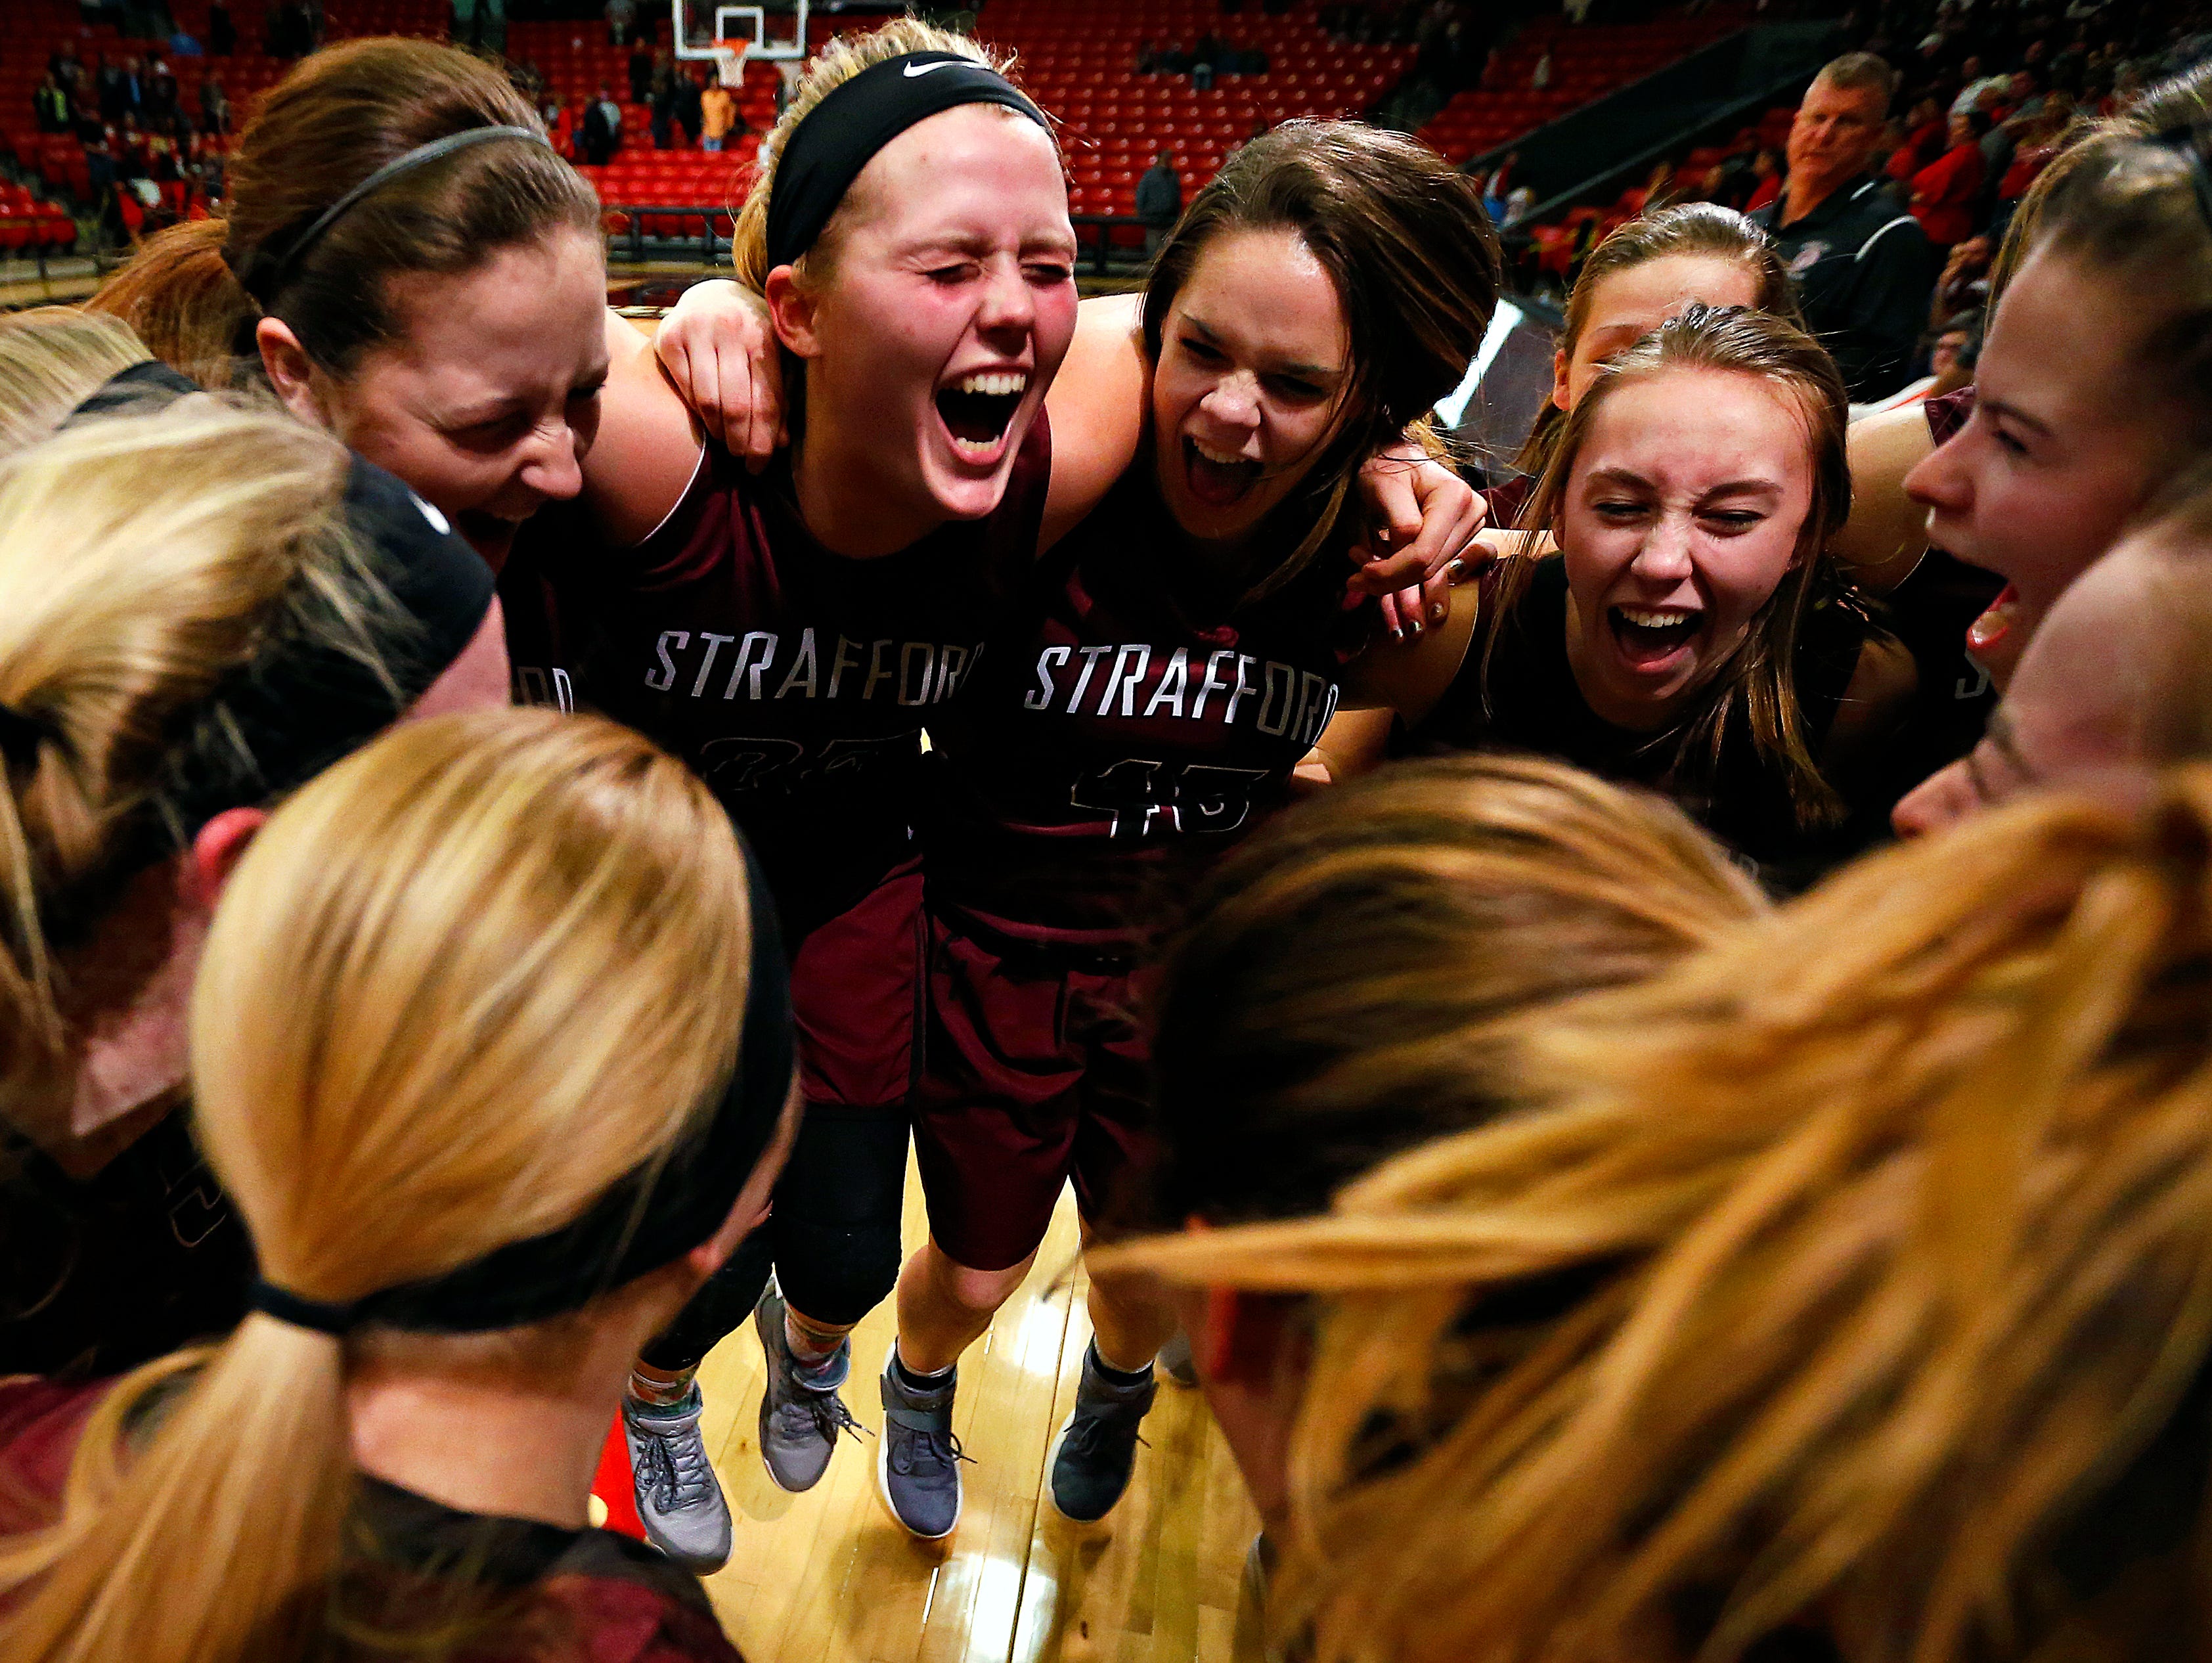 Strafford players celebrate after the end of the MSHSAA Class 3 quarterfinal game between the Strafford High School Lady Indians and the Southern Boone High School Eagles at O'Reilly Family Event Center in Springfield, Mo. on March 4, 2017. Strafford won the game 61-34.